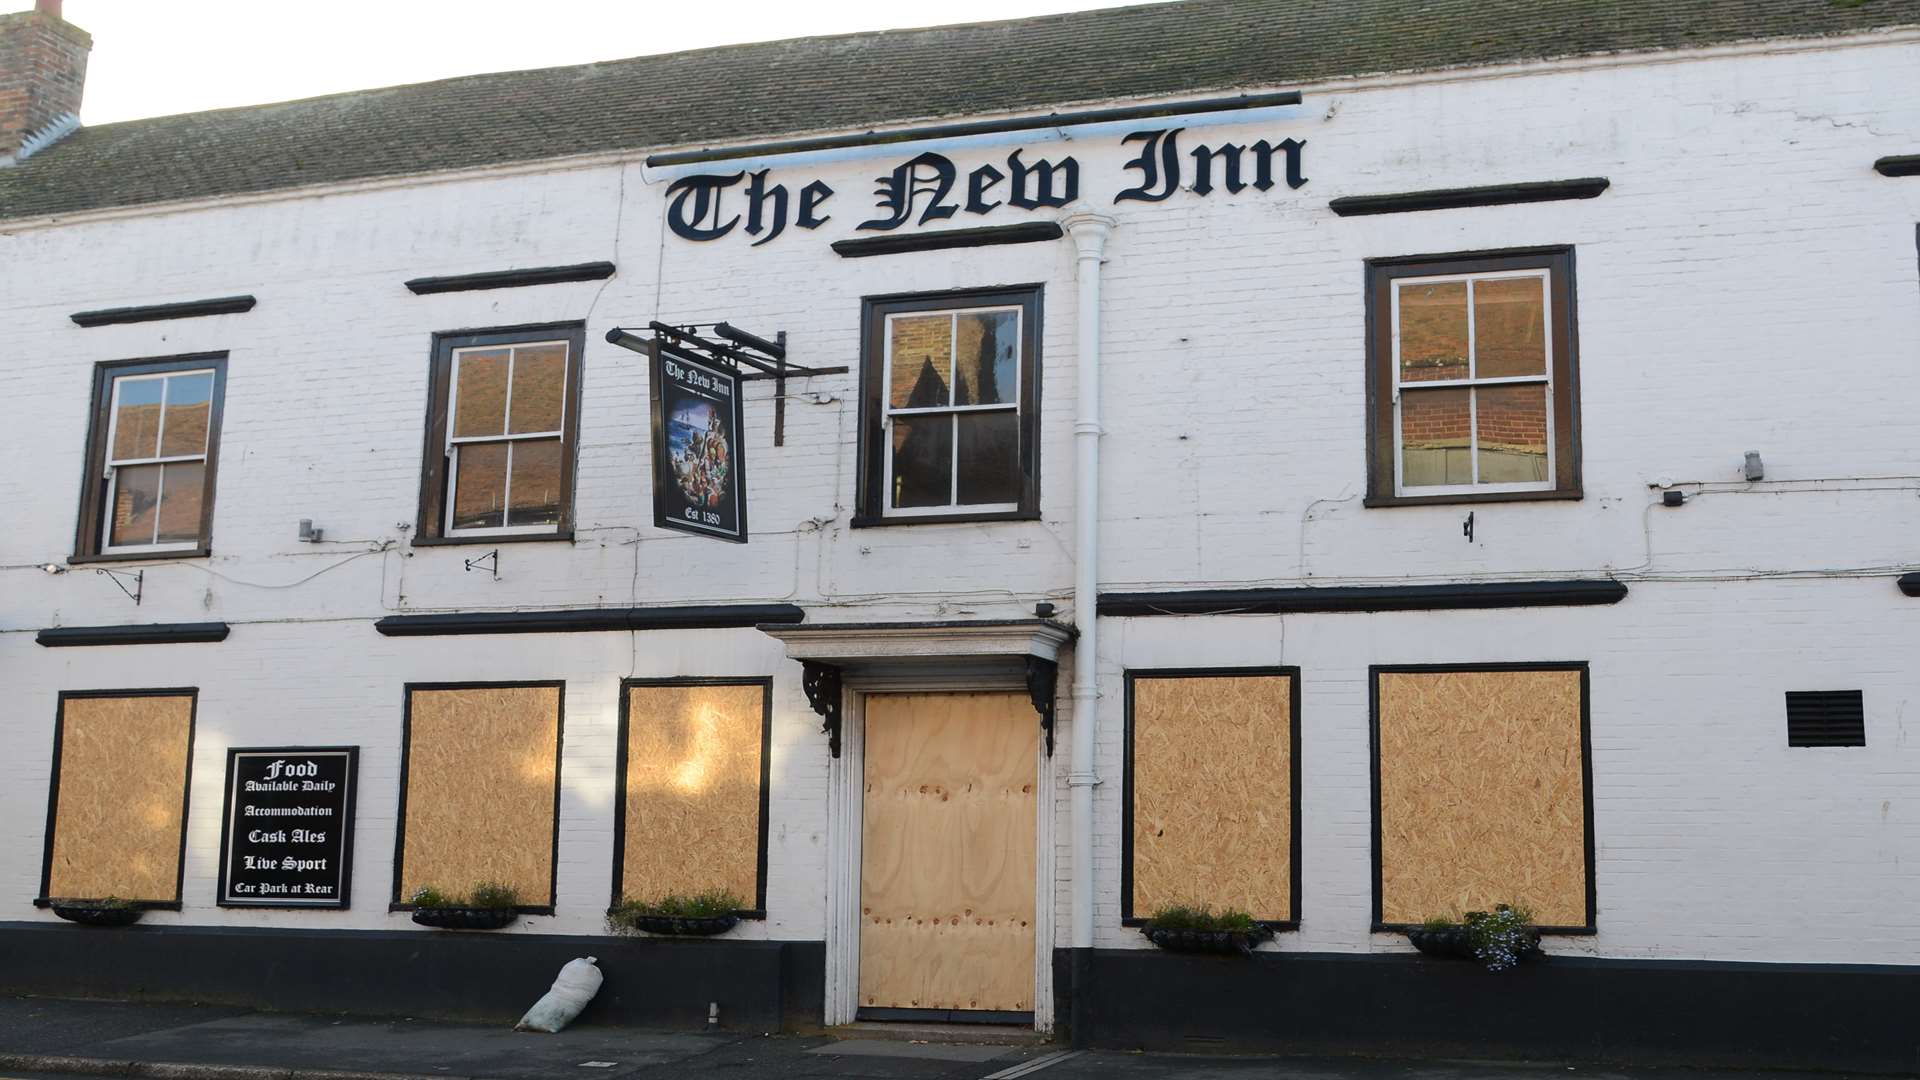 The New Inn, New Romney, closed after more than 600 years.